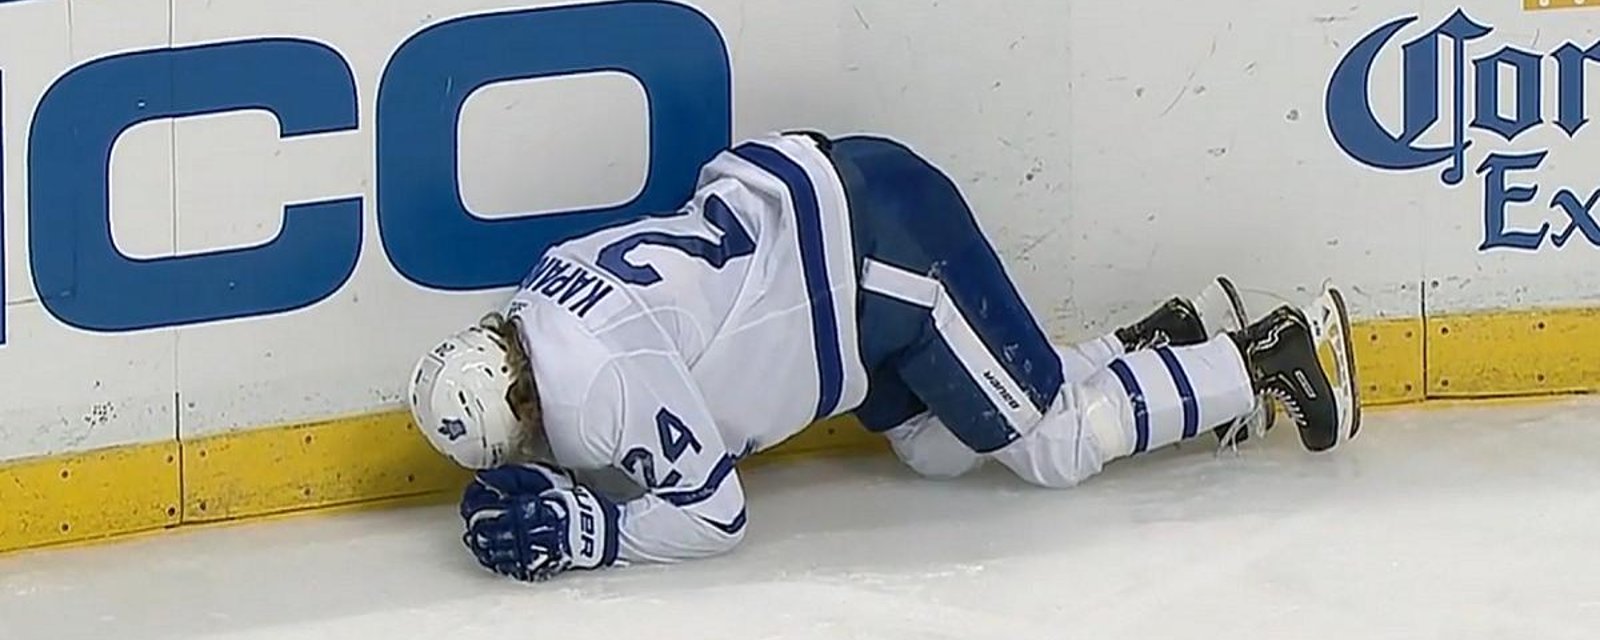 Kapanen shaken up after very late knee on knee from Brouwer.